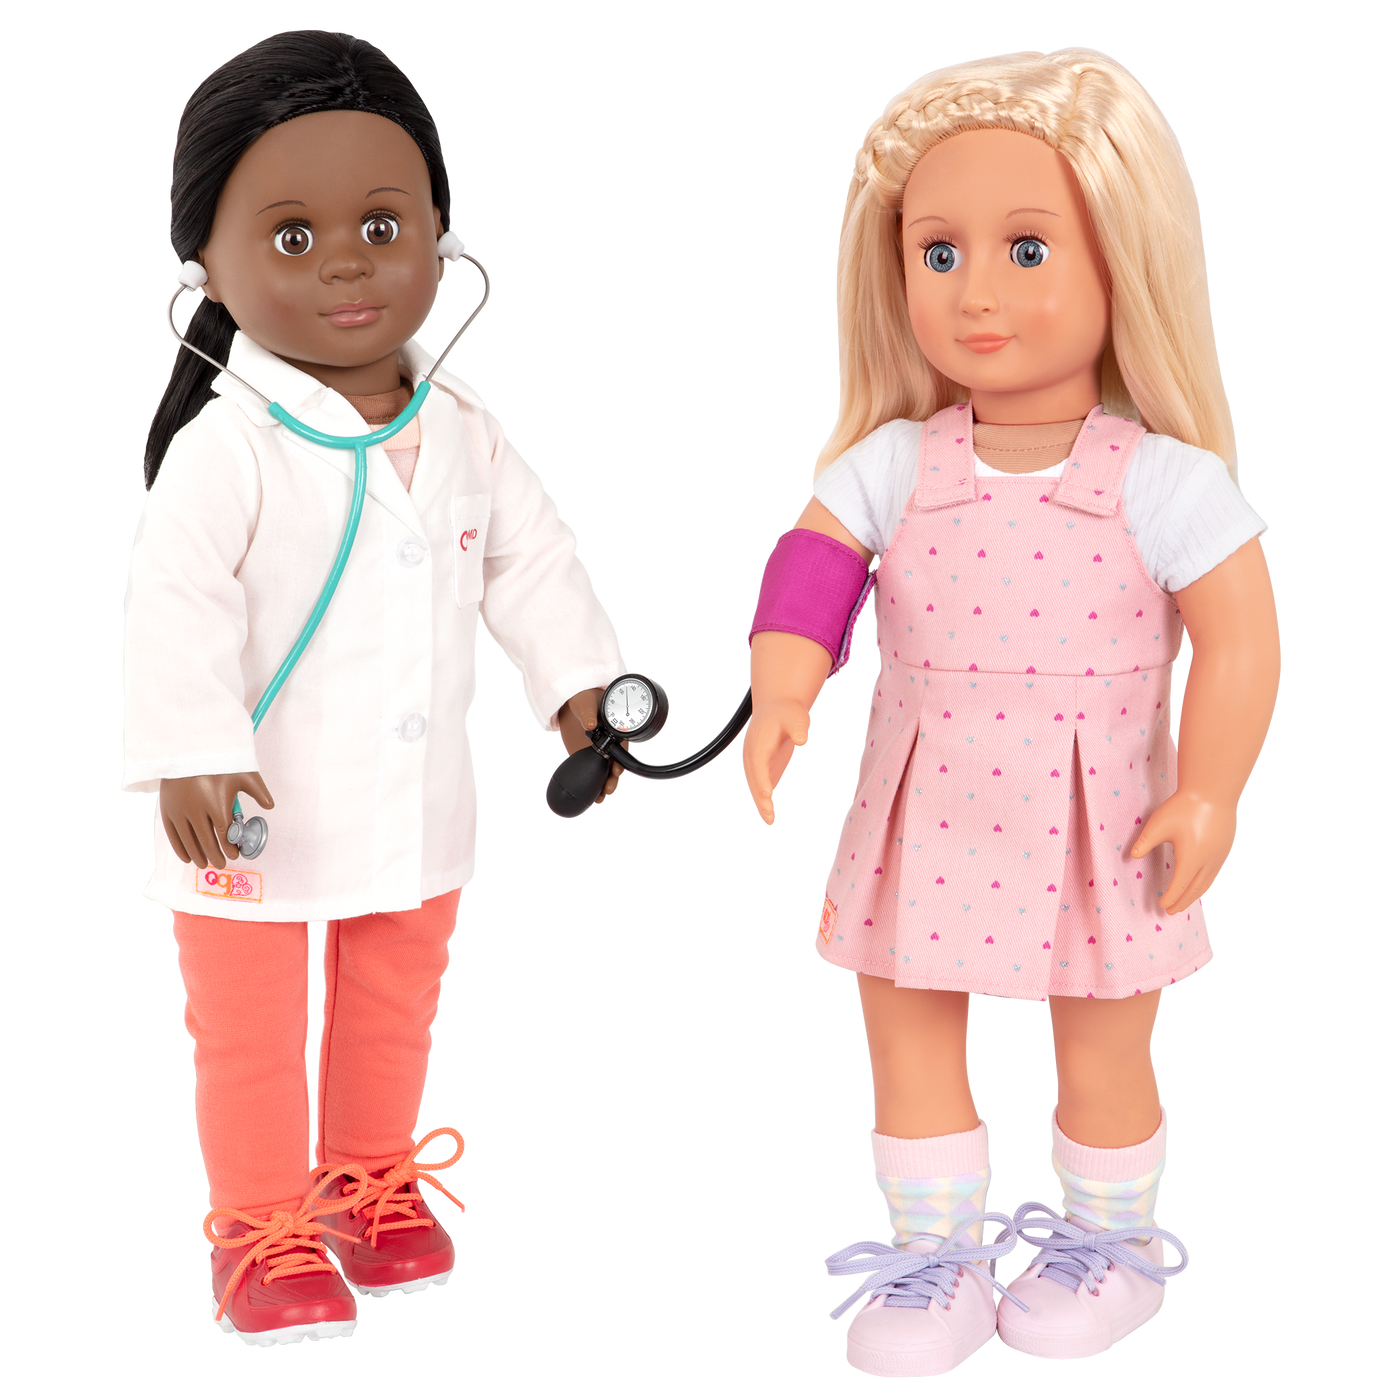 18-inch doll using doctor playset